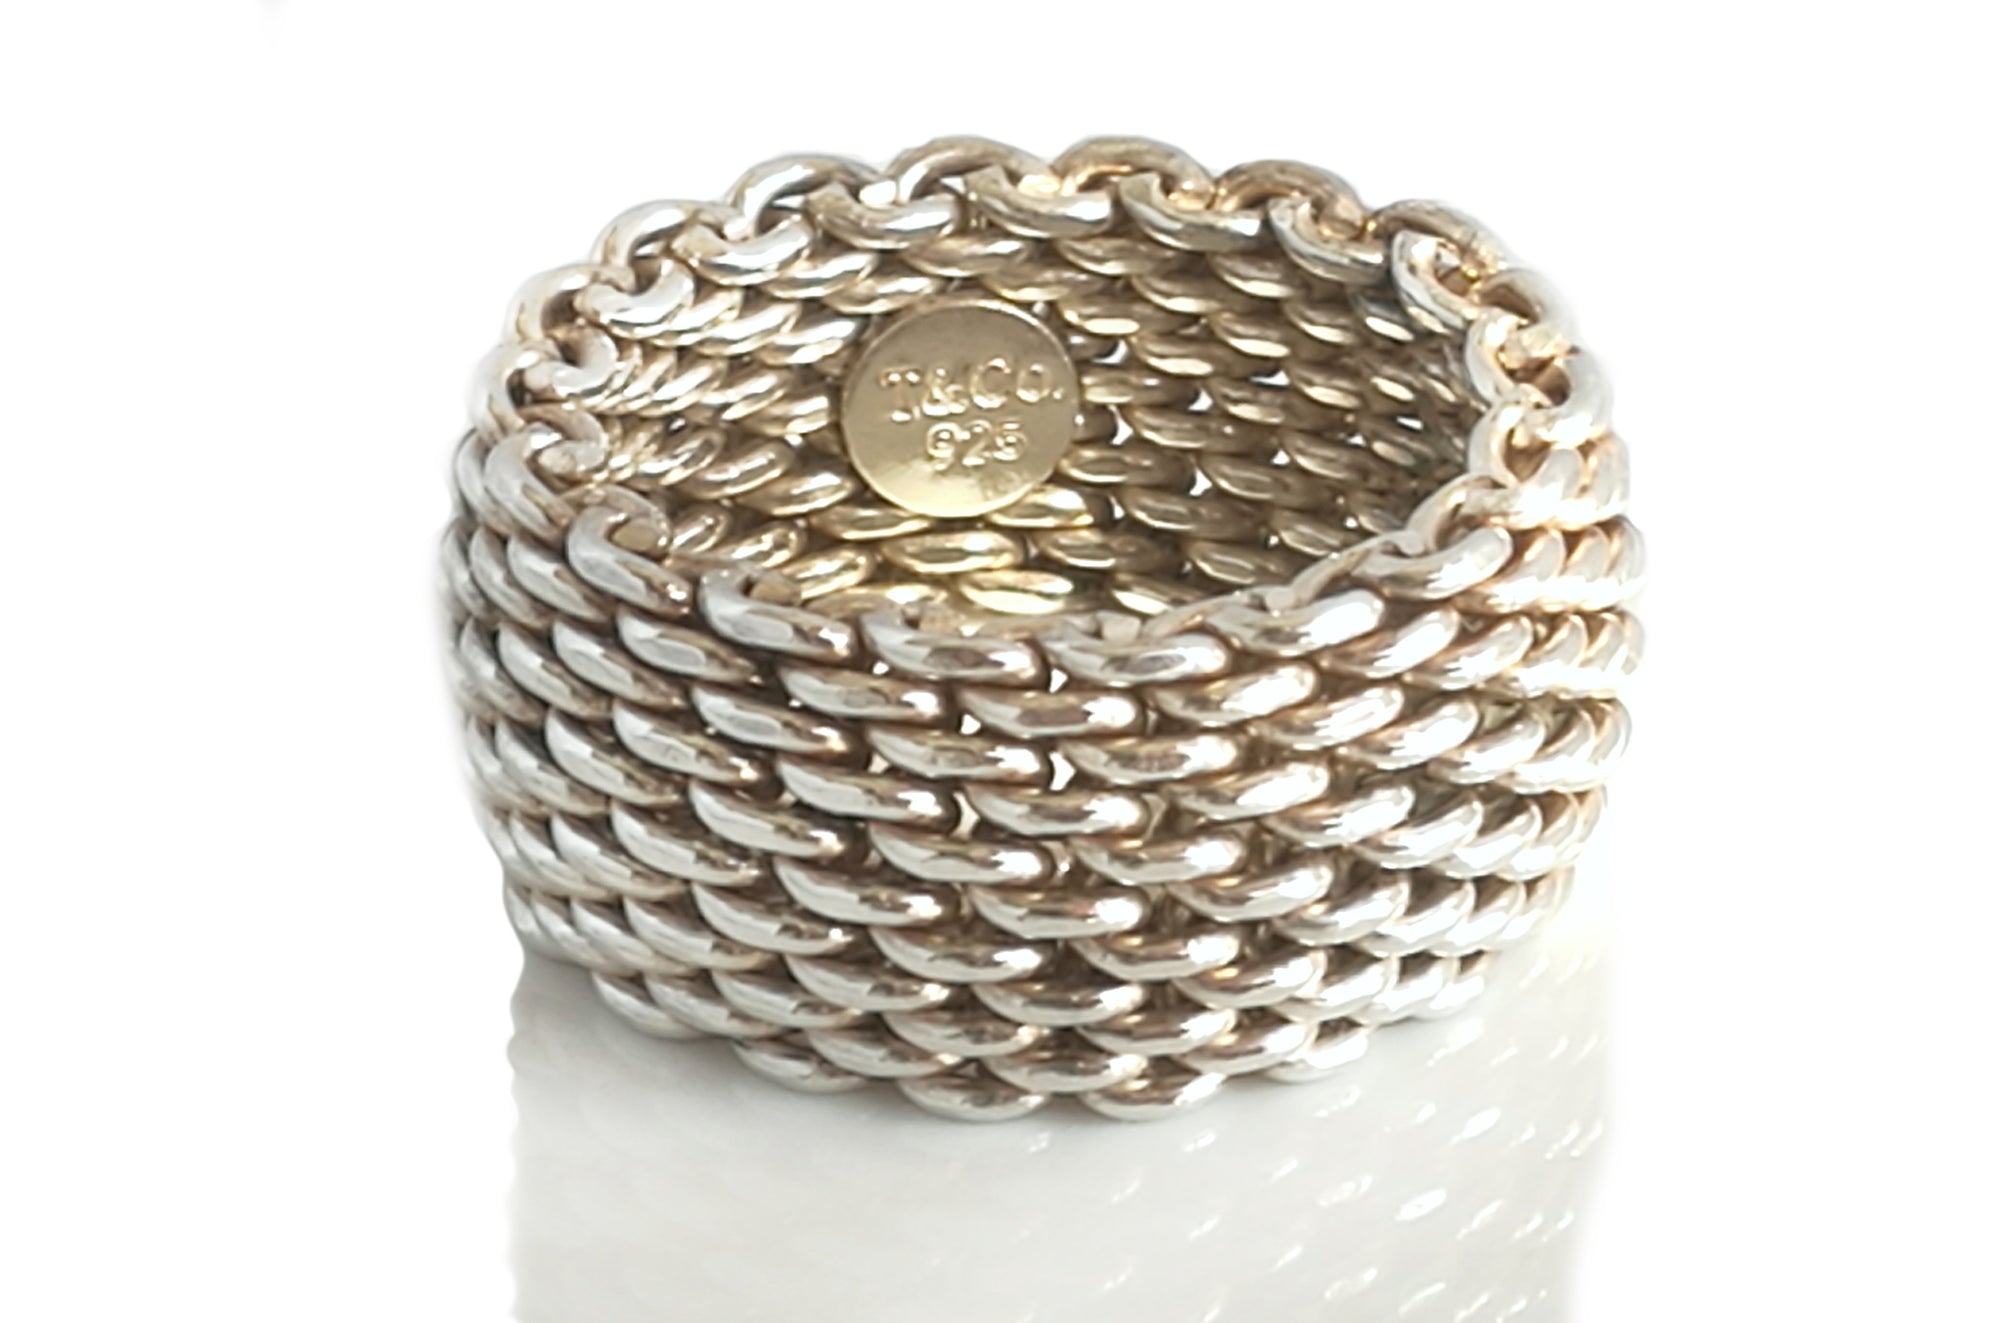 Tiffany & Co. Somerset Woven Ring, Size K